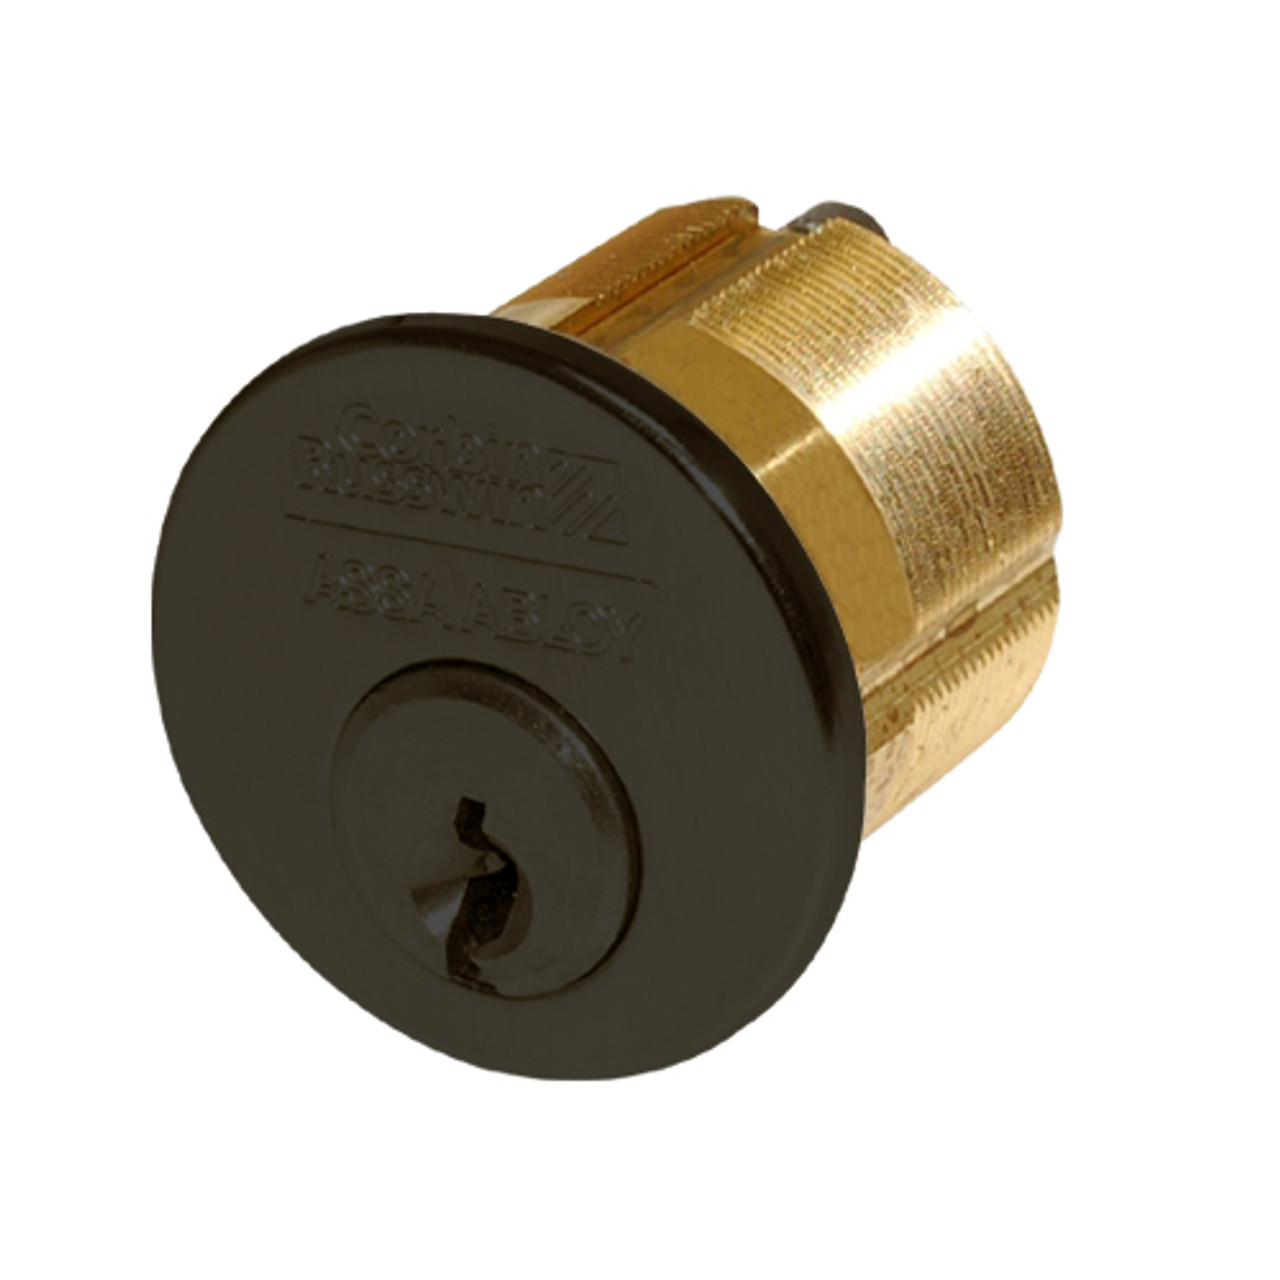 CR1000-200-A02-6-57A1-613 Corbin Conventional Mortise Cylinder for Mortise Lock and DL3000 Deadlocks with Straight Cam in Oil Rubbed Bronze Finish